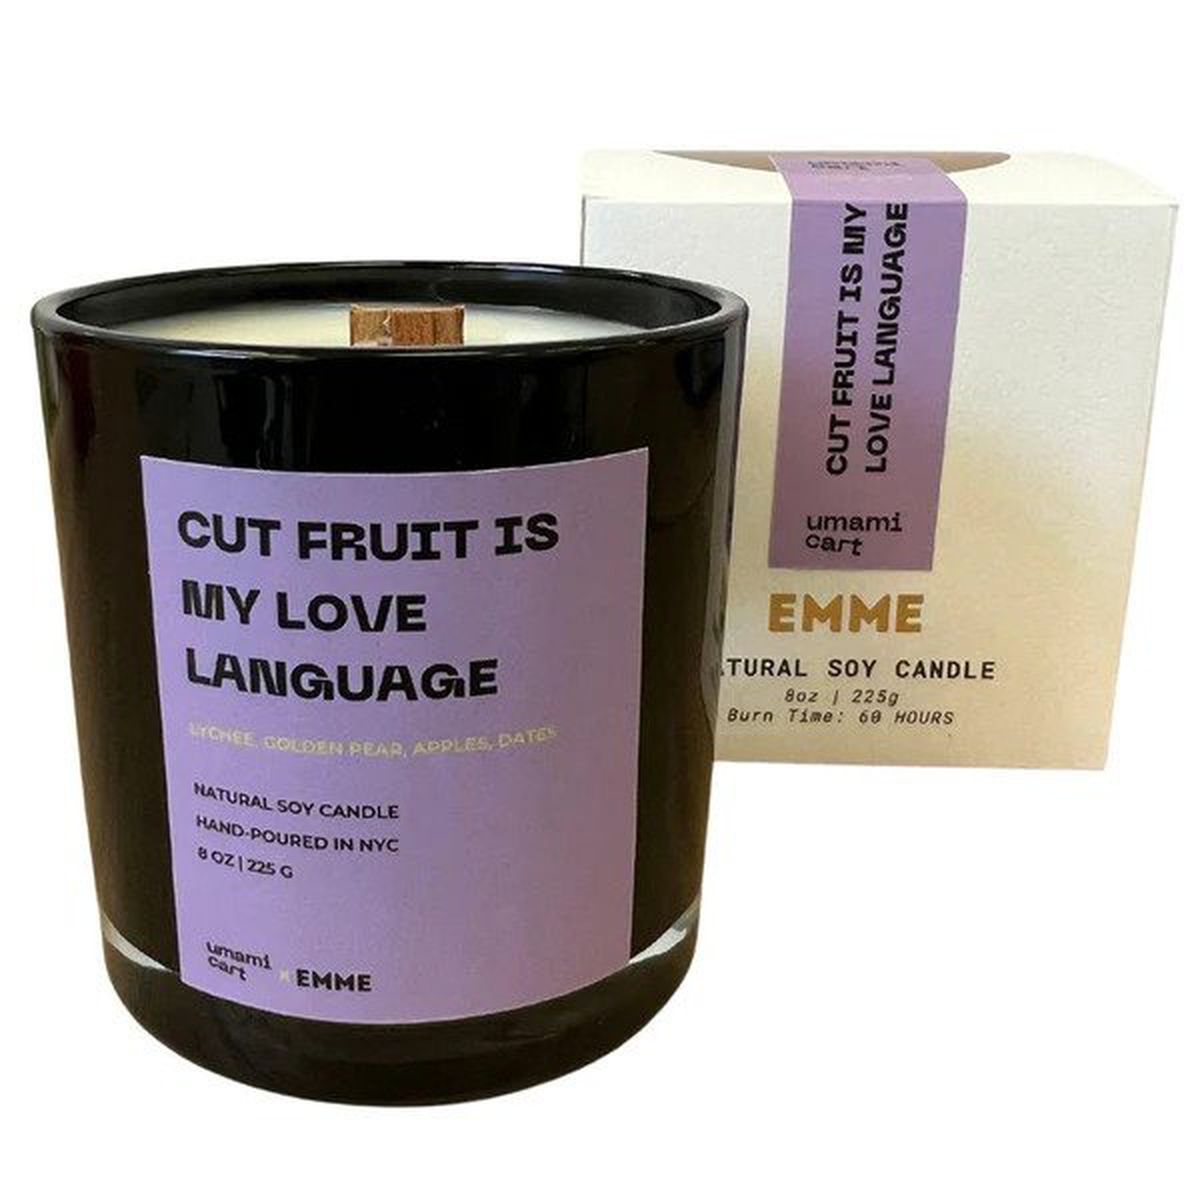 A candle with a label that reads “cut fruit is my love language”